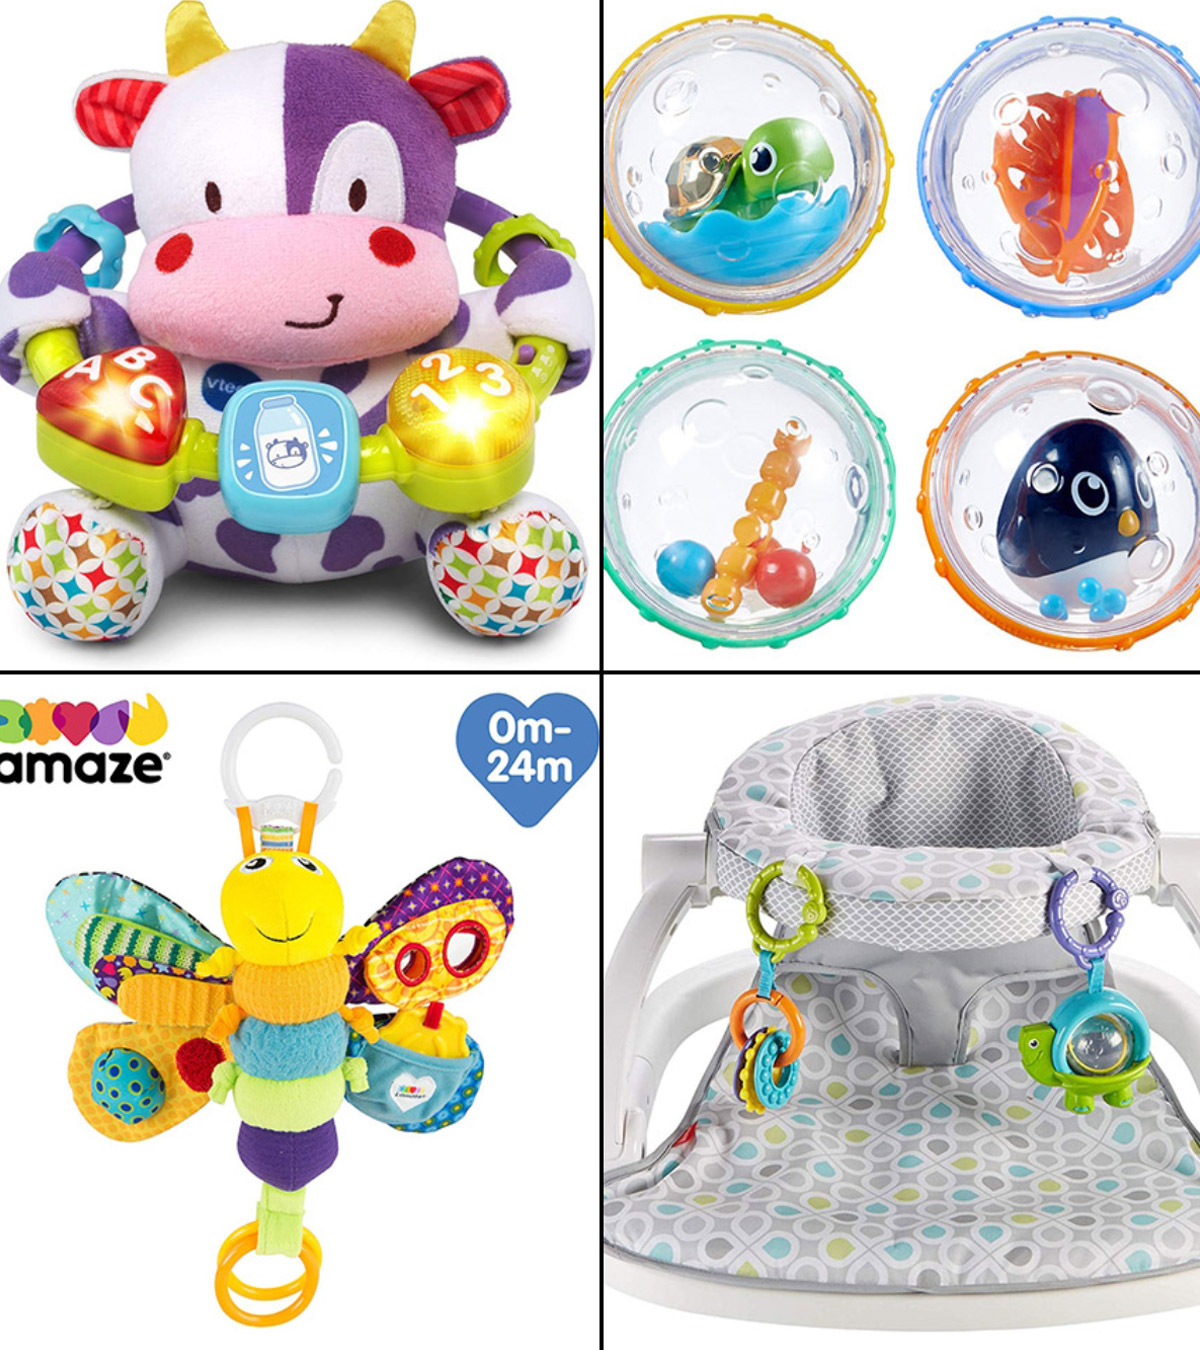 25 Best Toys For 4-Month-Olds In 2023, As Per An Educator